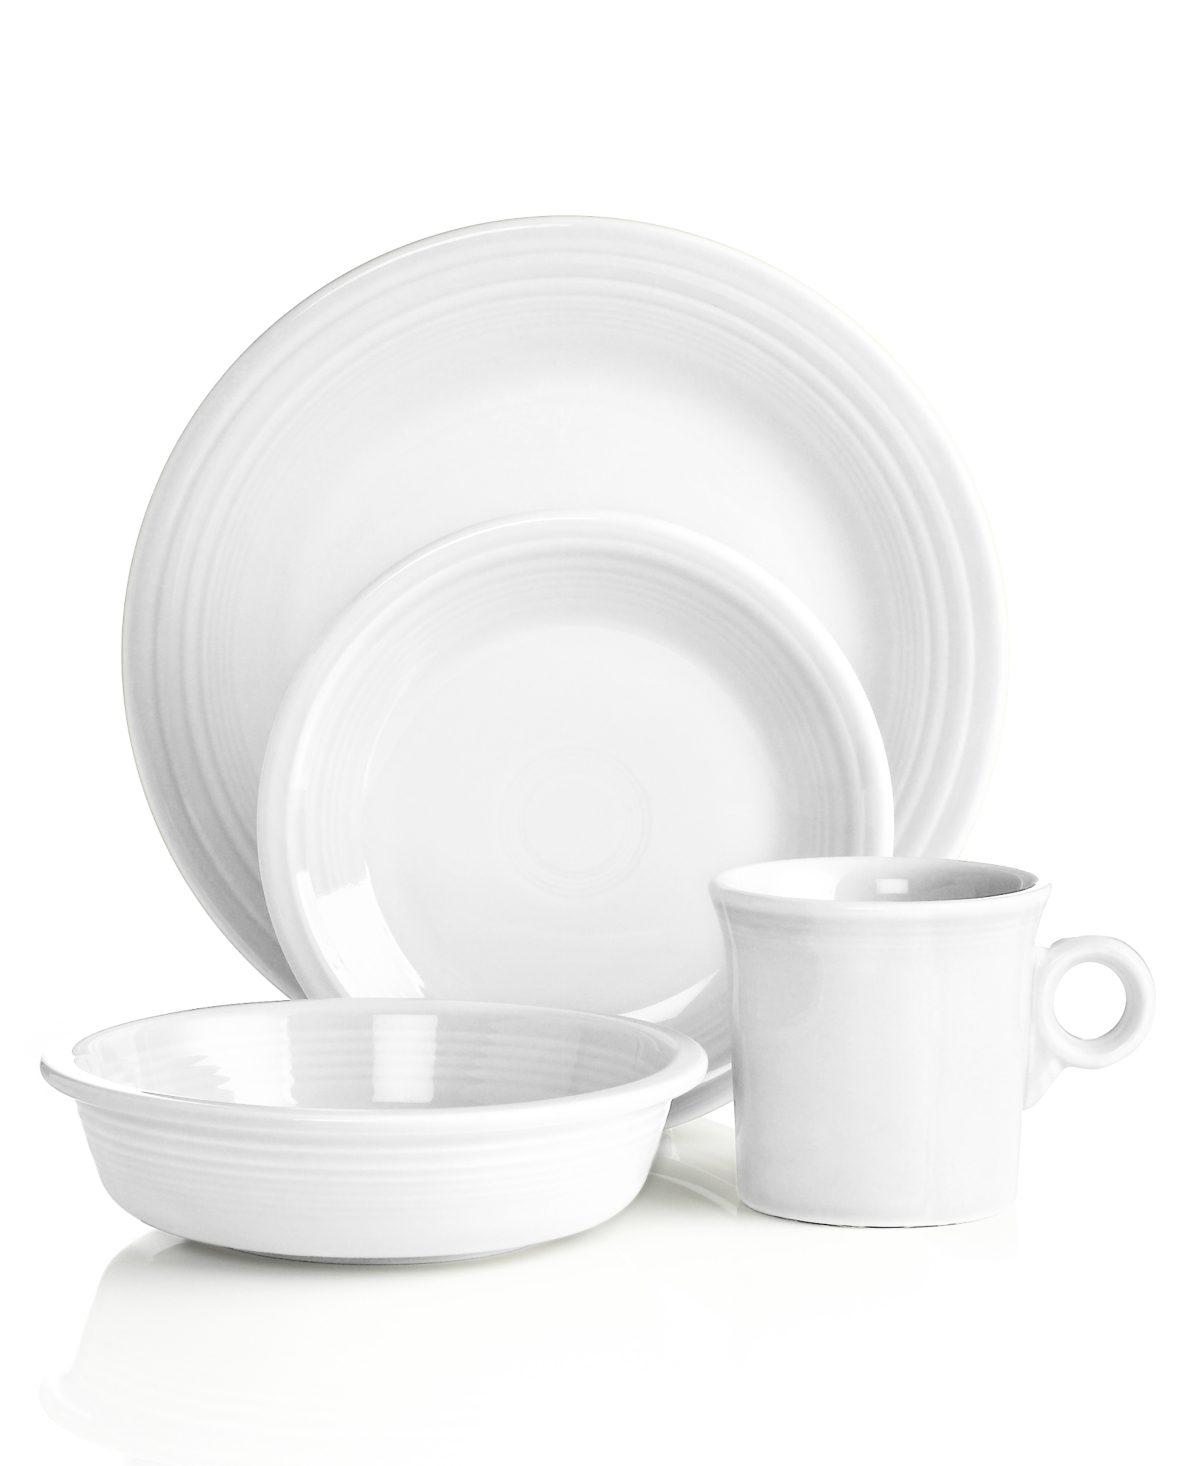 4-Piece Place Setting - White